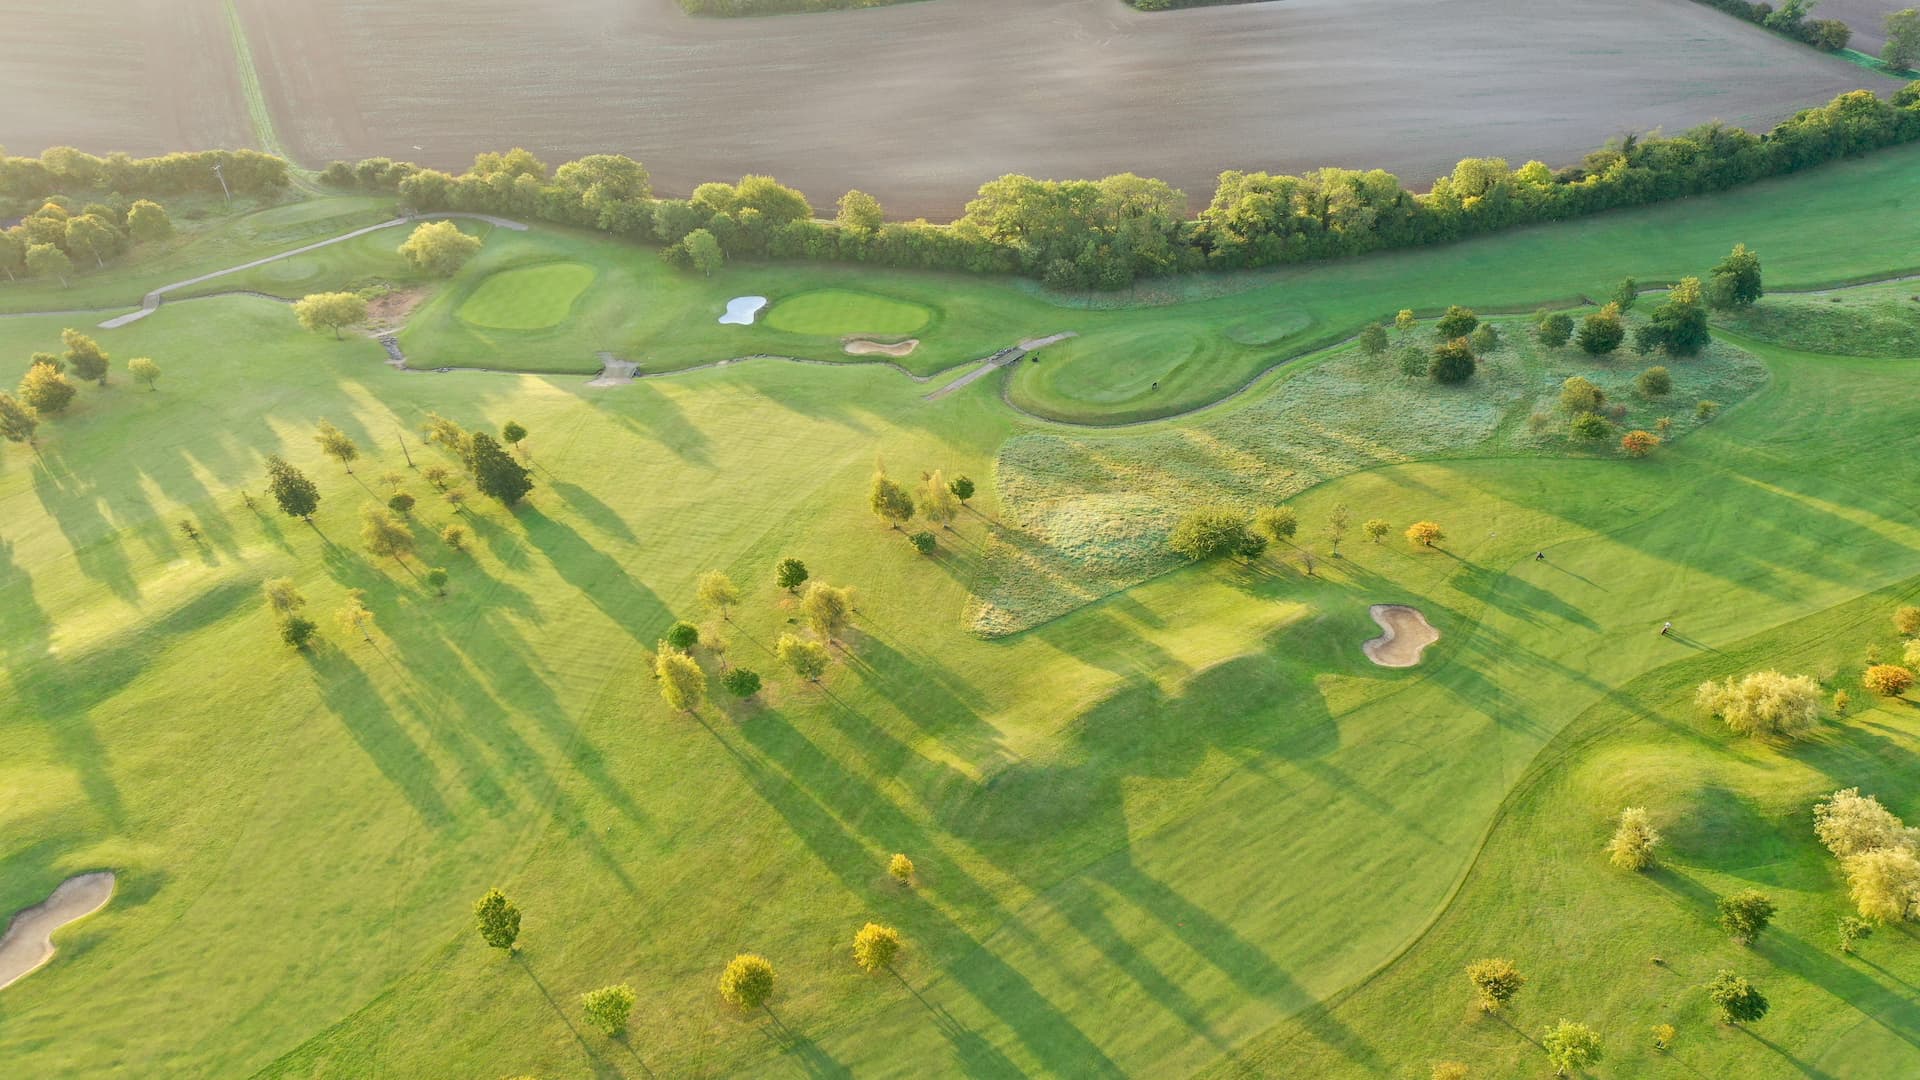 Aerial view of Chesfield Downs 18-hole golf course